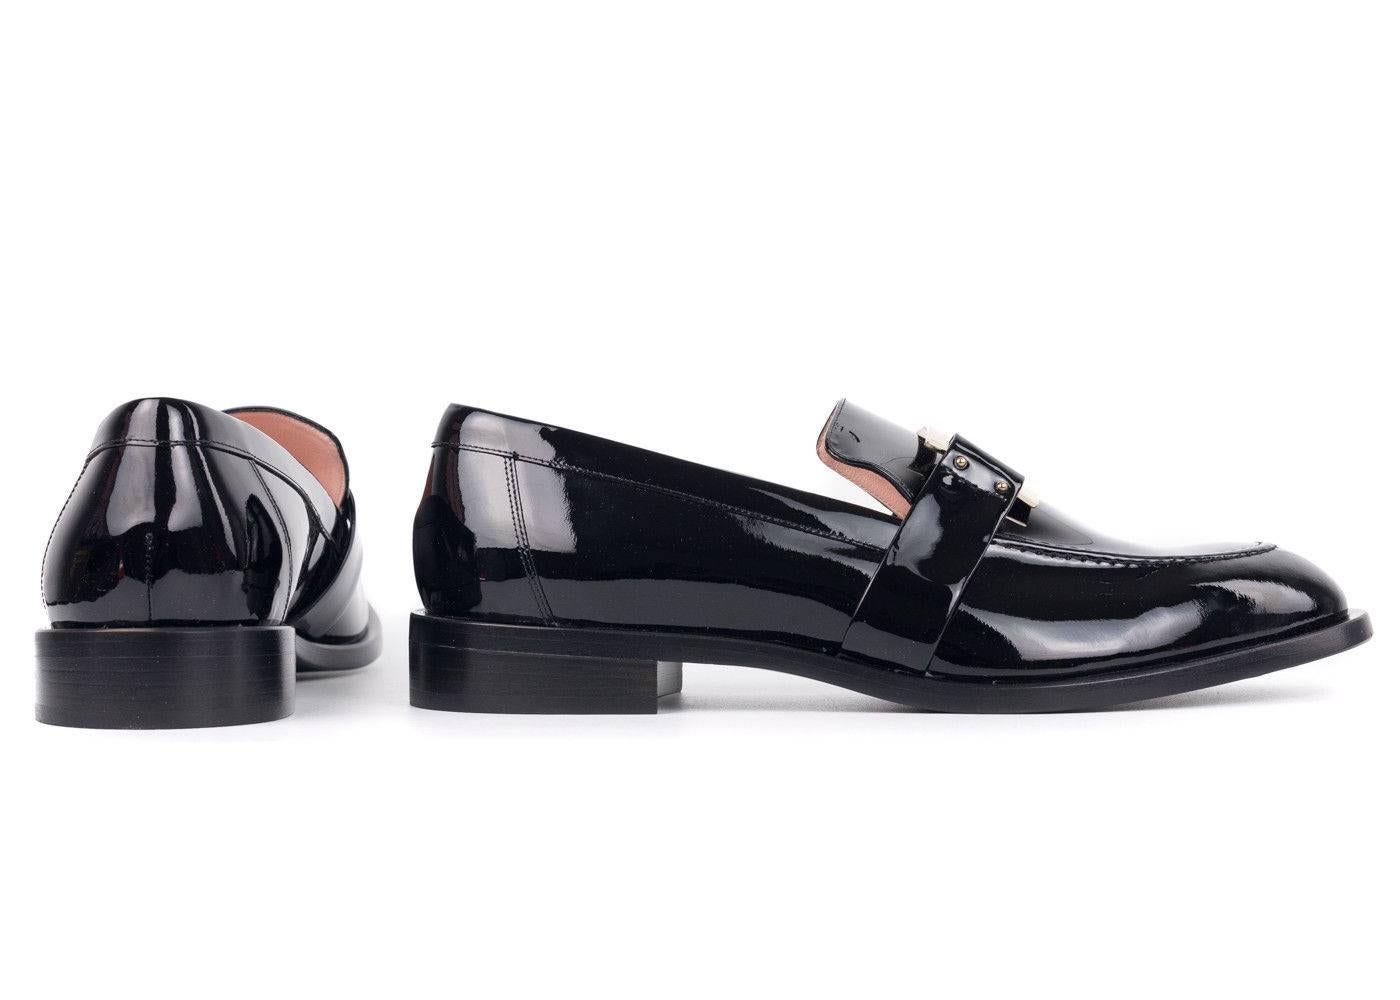 With gold-tone buckle detailing and a slight block heel, these loafers perfectly captures Roger Vivier’s immaculately polished aesthetic. Crafted in Italy from glossy patent leather, the slip-on shoe will lend a sophisticated finish to everyday